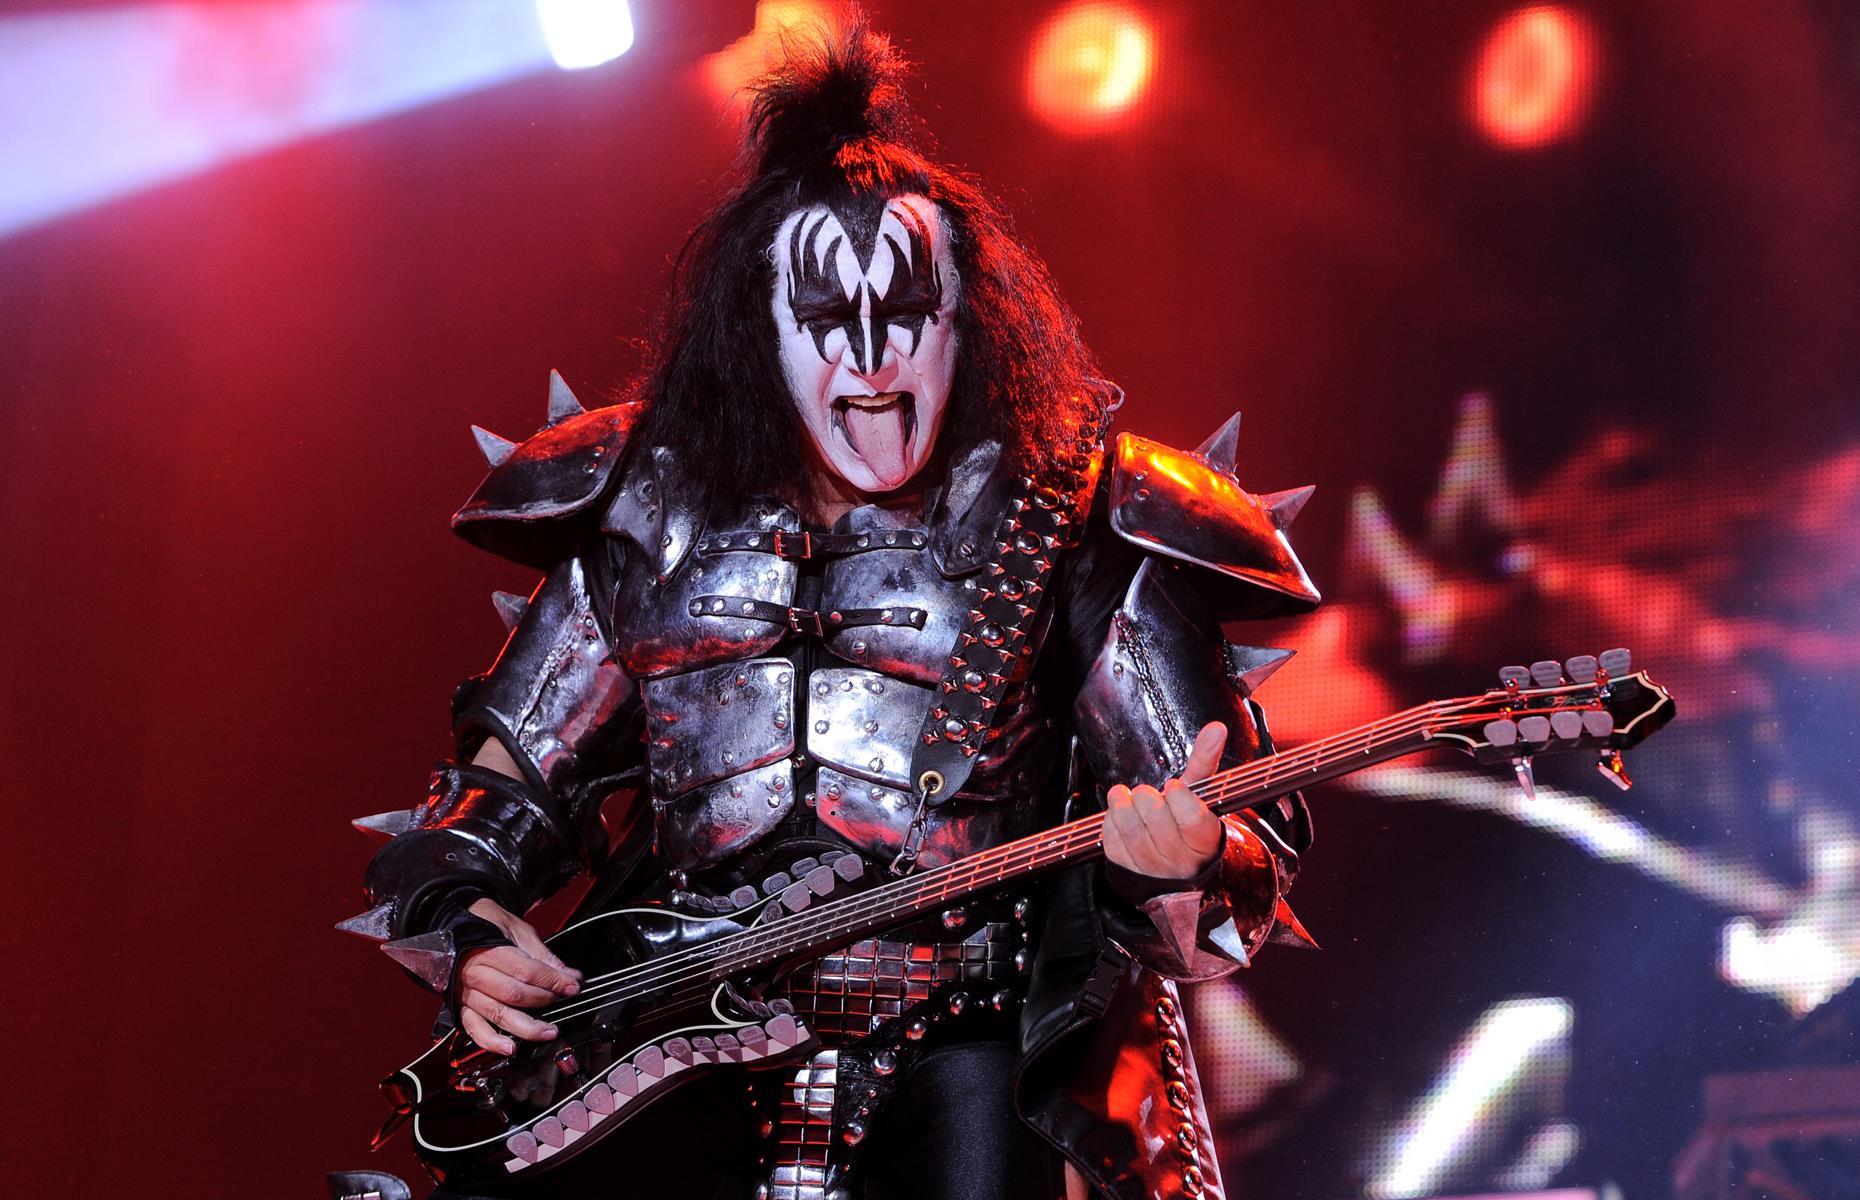 Gene Simmons worked at Vogue